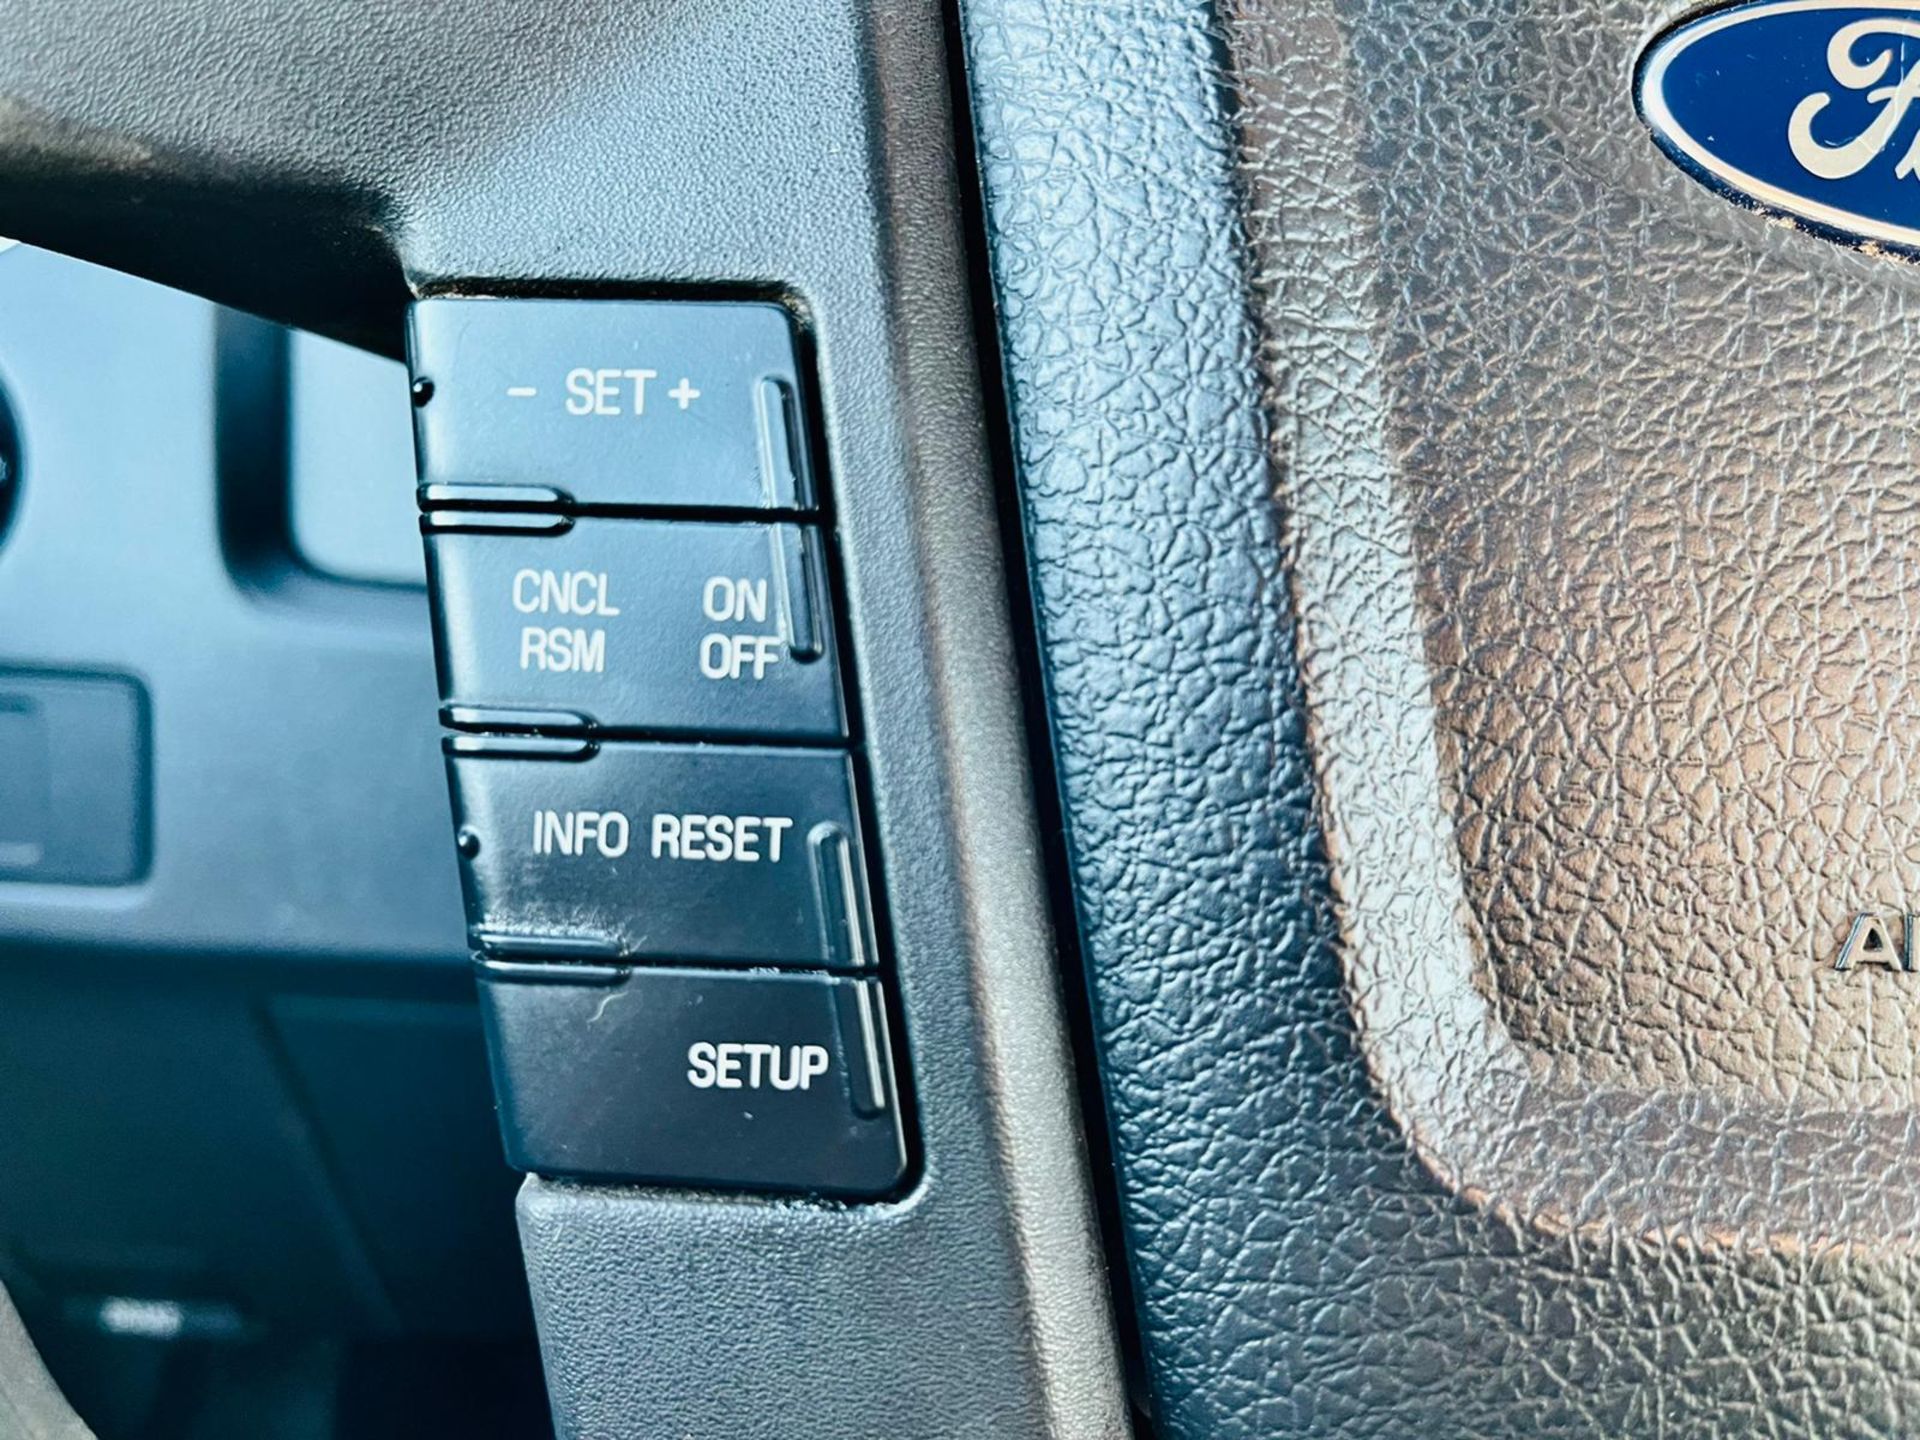 Ford F-150 5.0L V8 XLT Edition 4WD Super-Crew '2011 Year' A/C - Cruise Control - Chrome Pack - Image 23 of 29